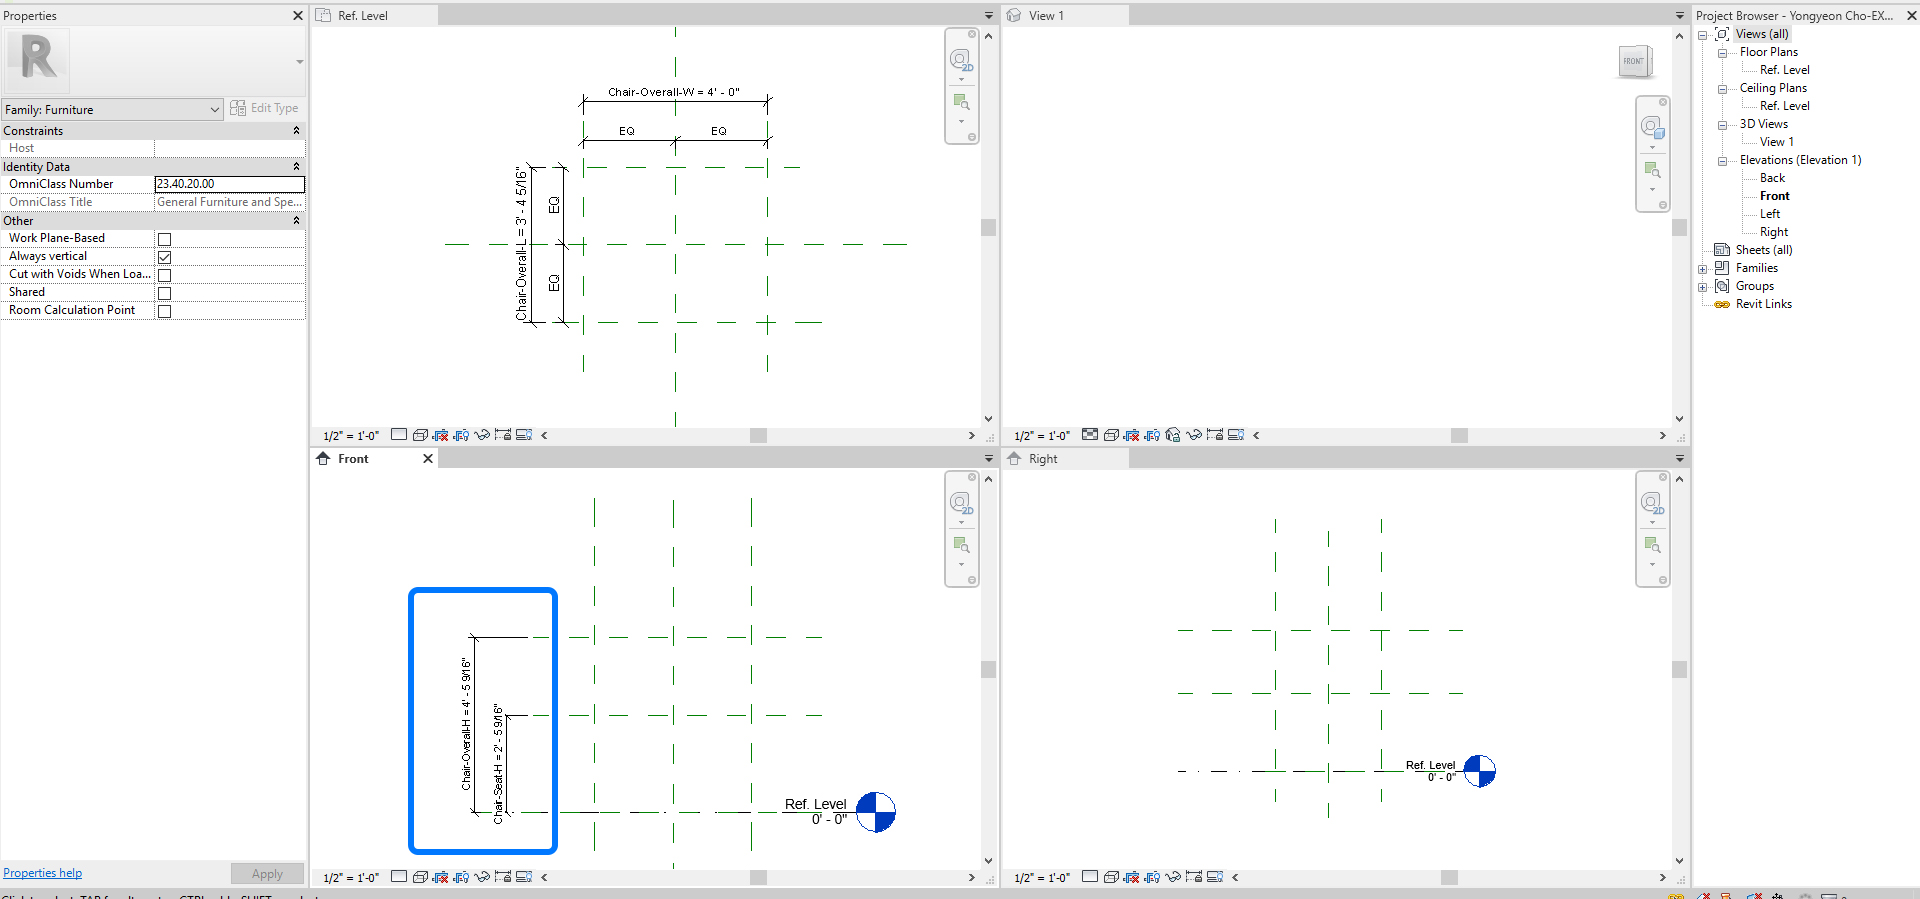 It indicates how to add reference planes, dimensions, and parameters on the front view.